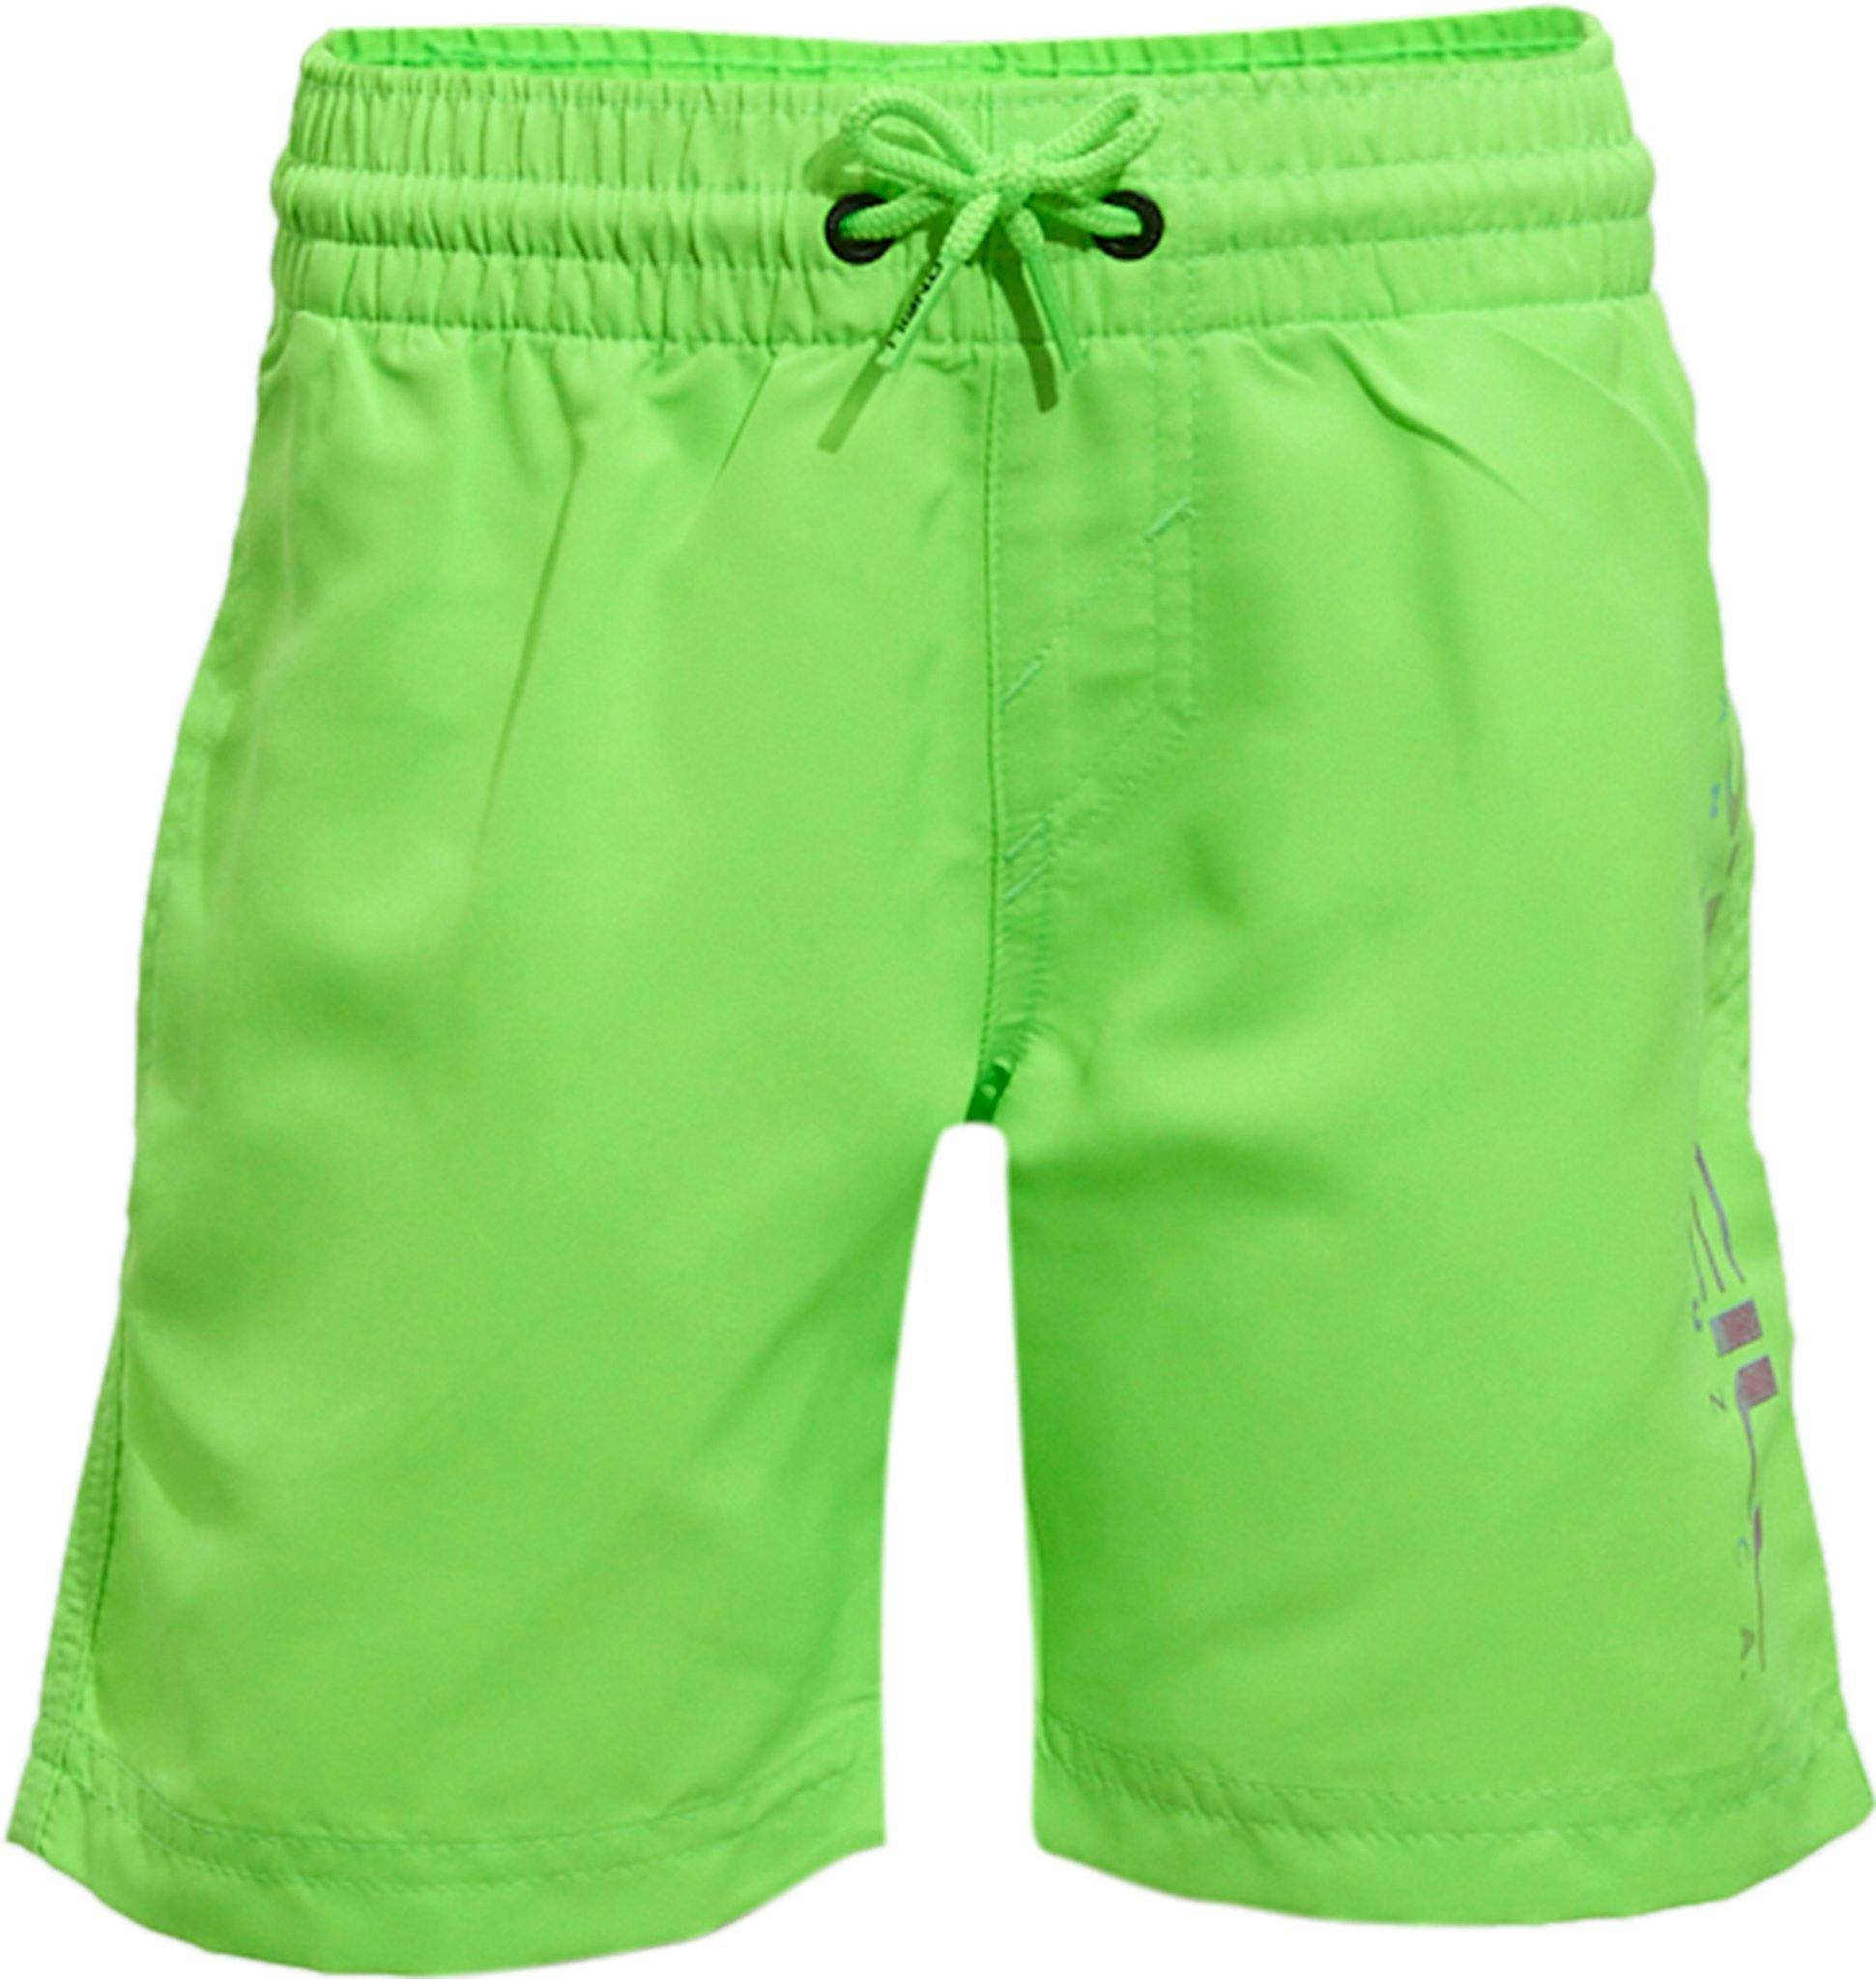 Product image for Cali Melting Volley Swim Shorts 14'' - Boys